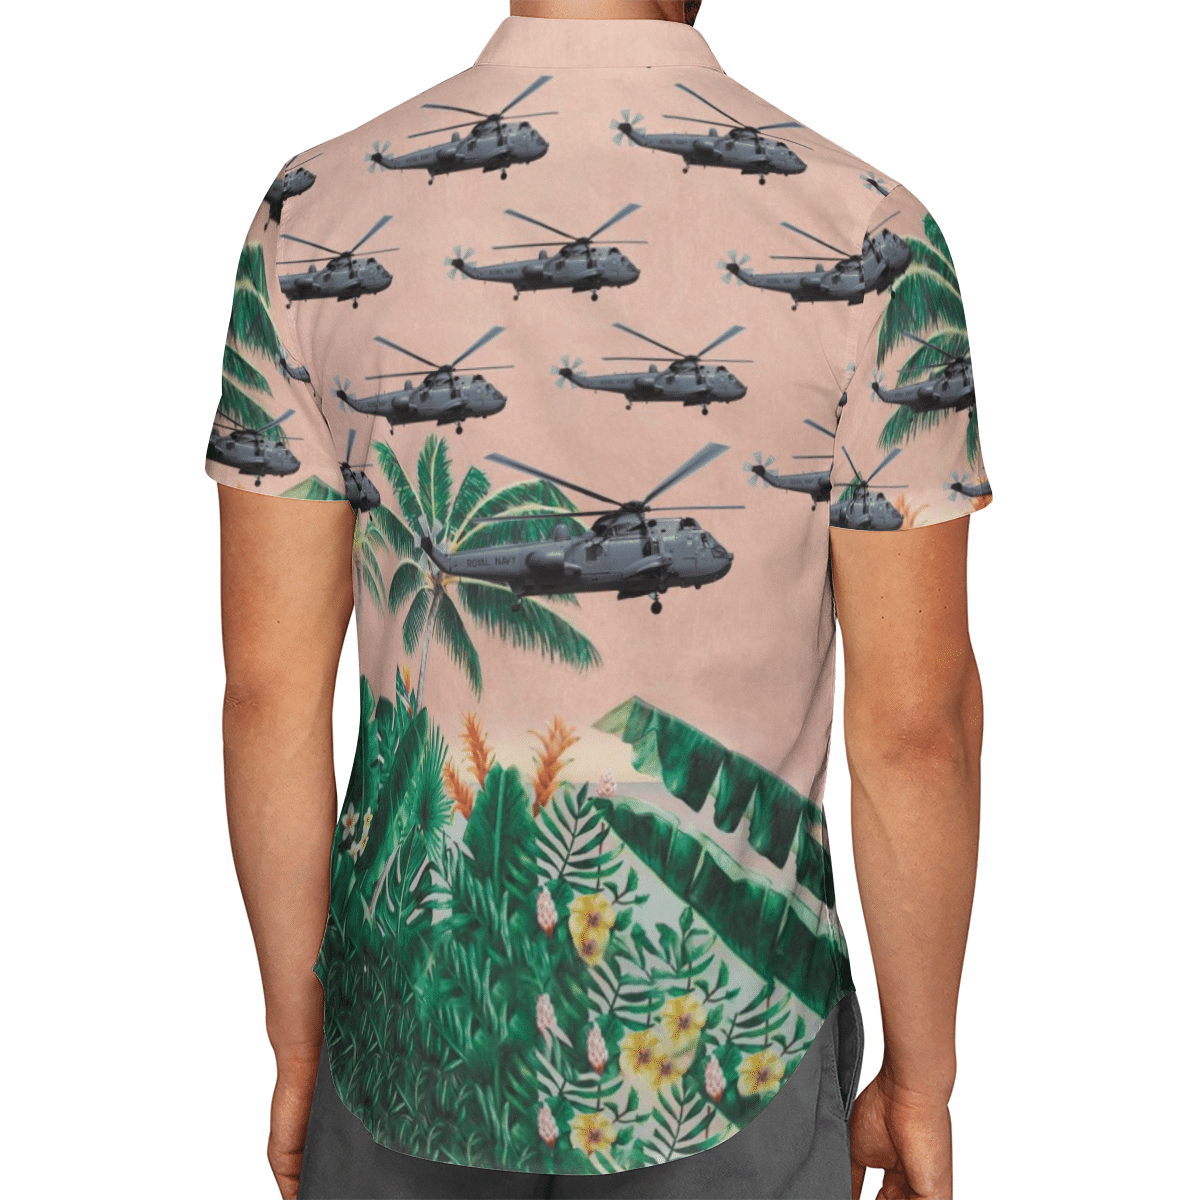 Going to the beach with a quality shirt 146